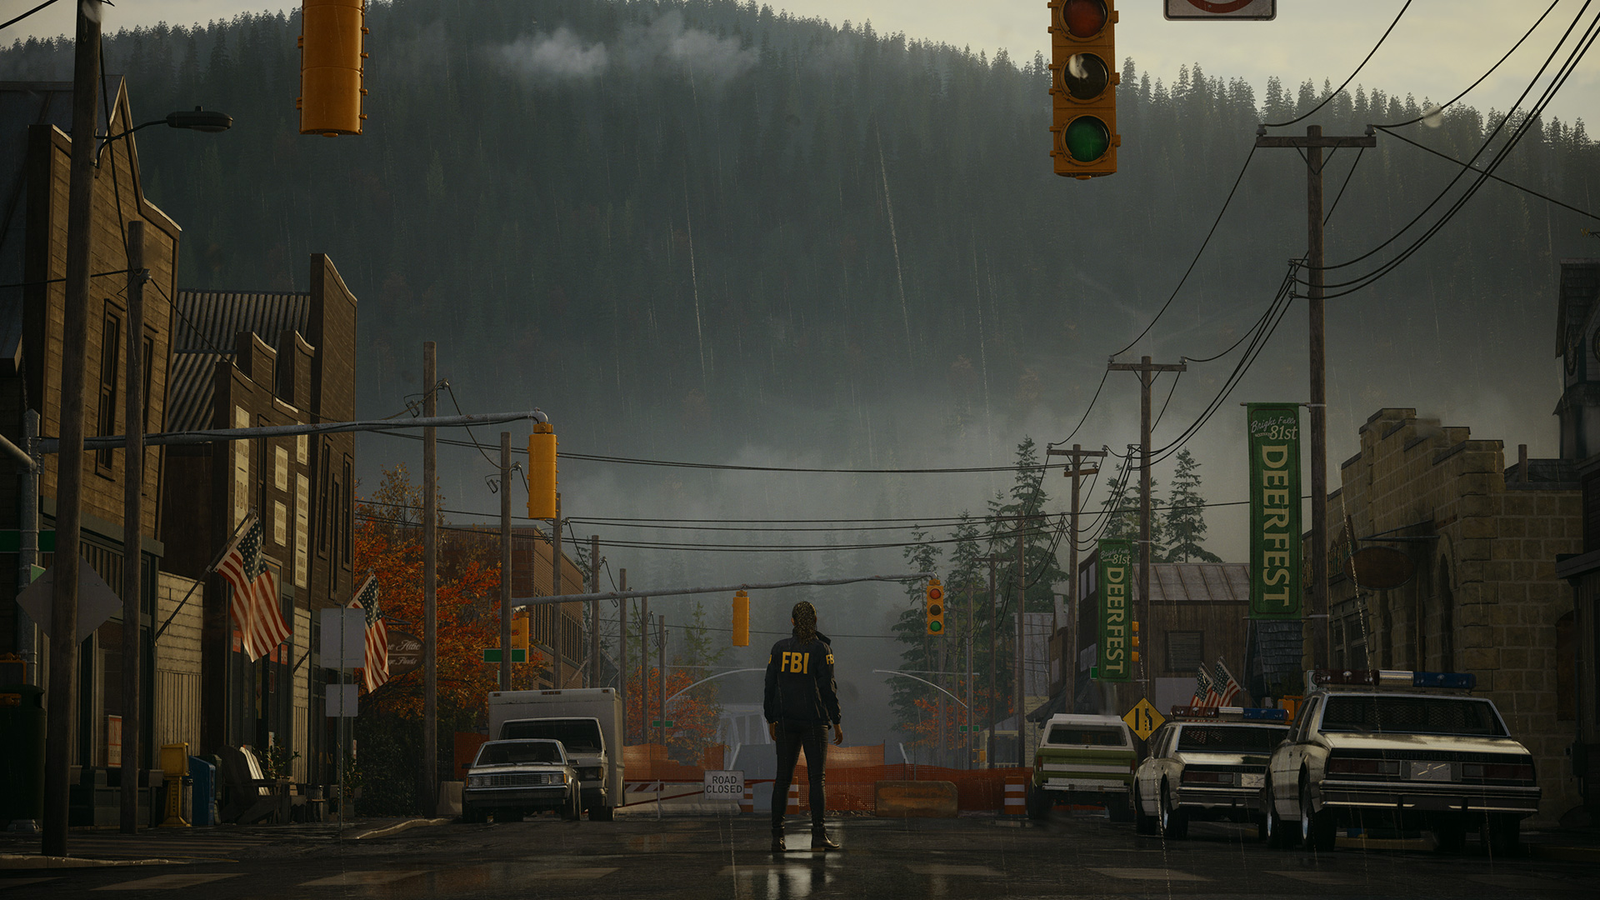 Alan Wake 2 is Digital Only to Allow “More Time” for Polish, Says Director